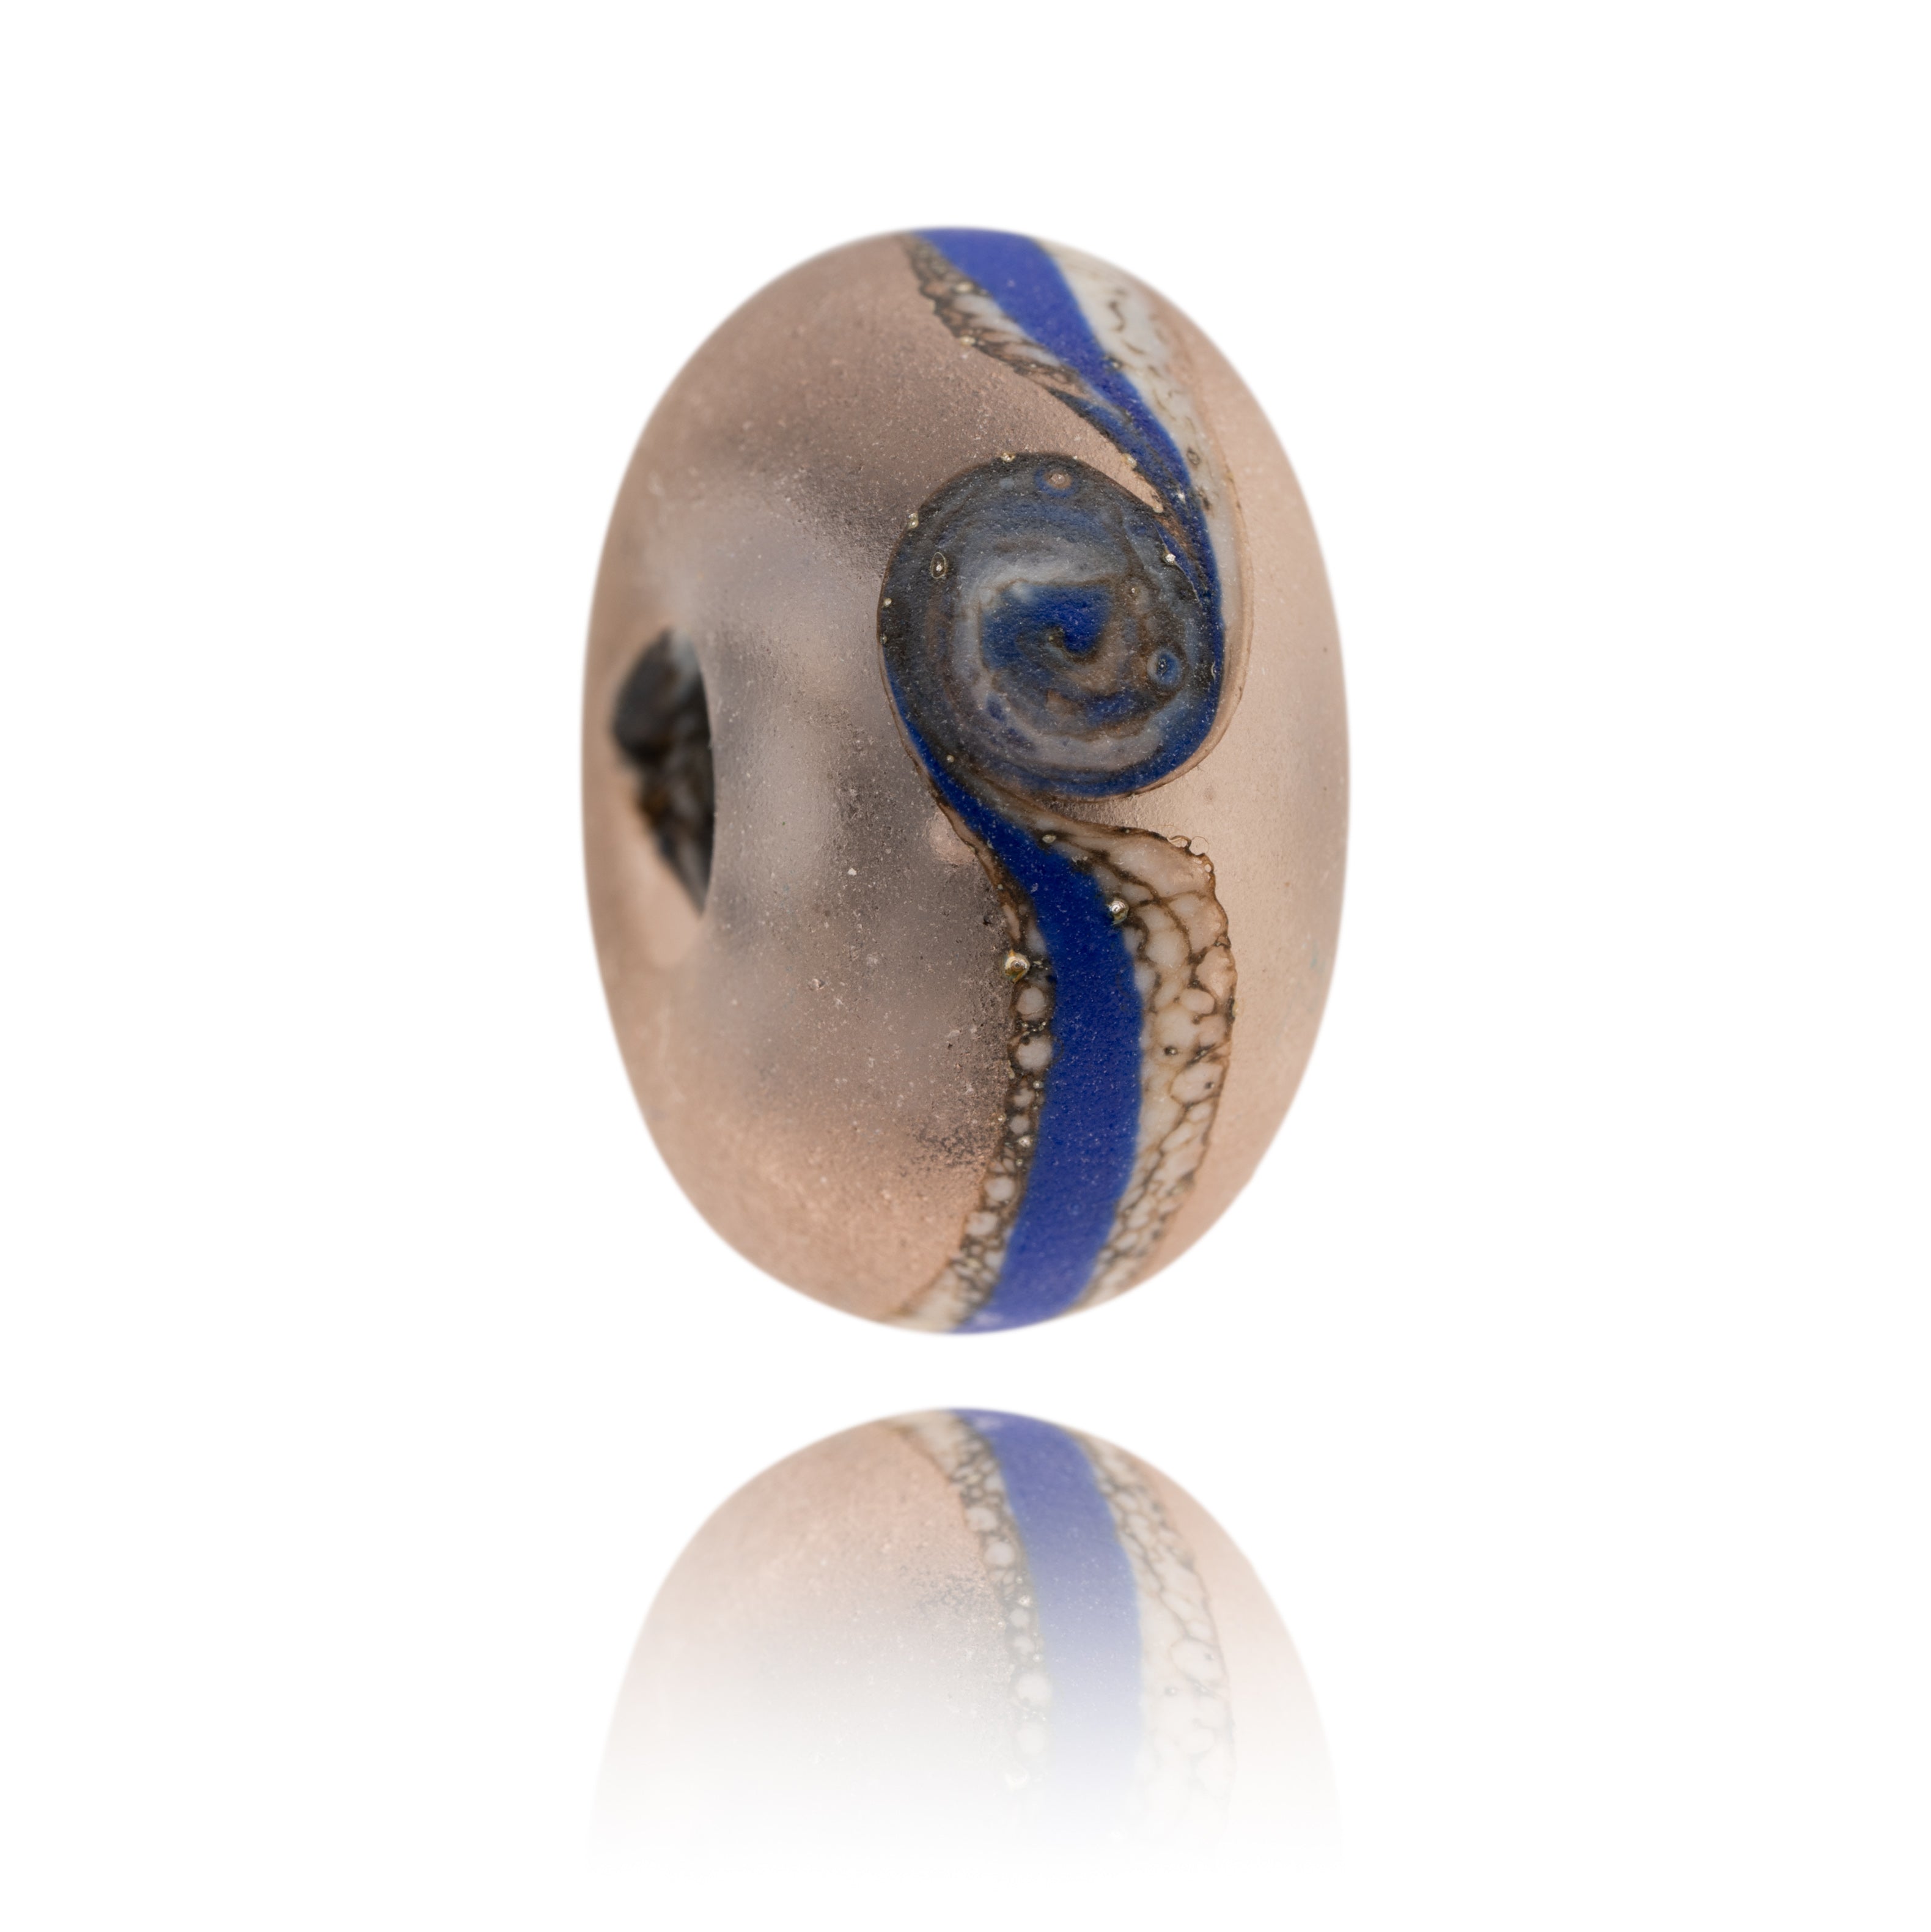 Frosted pink glass bead decorated with blue stripe around middle. Representing Embleton Beach in Northumberland.